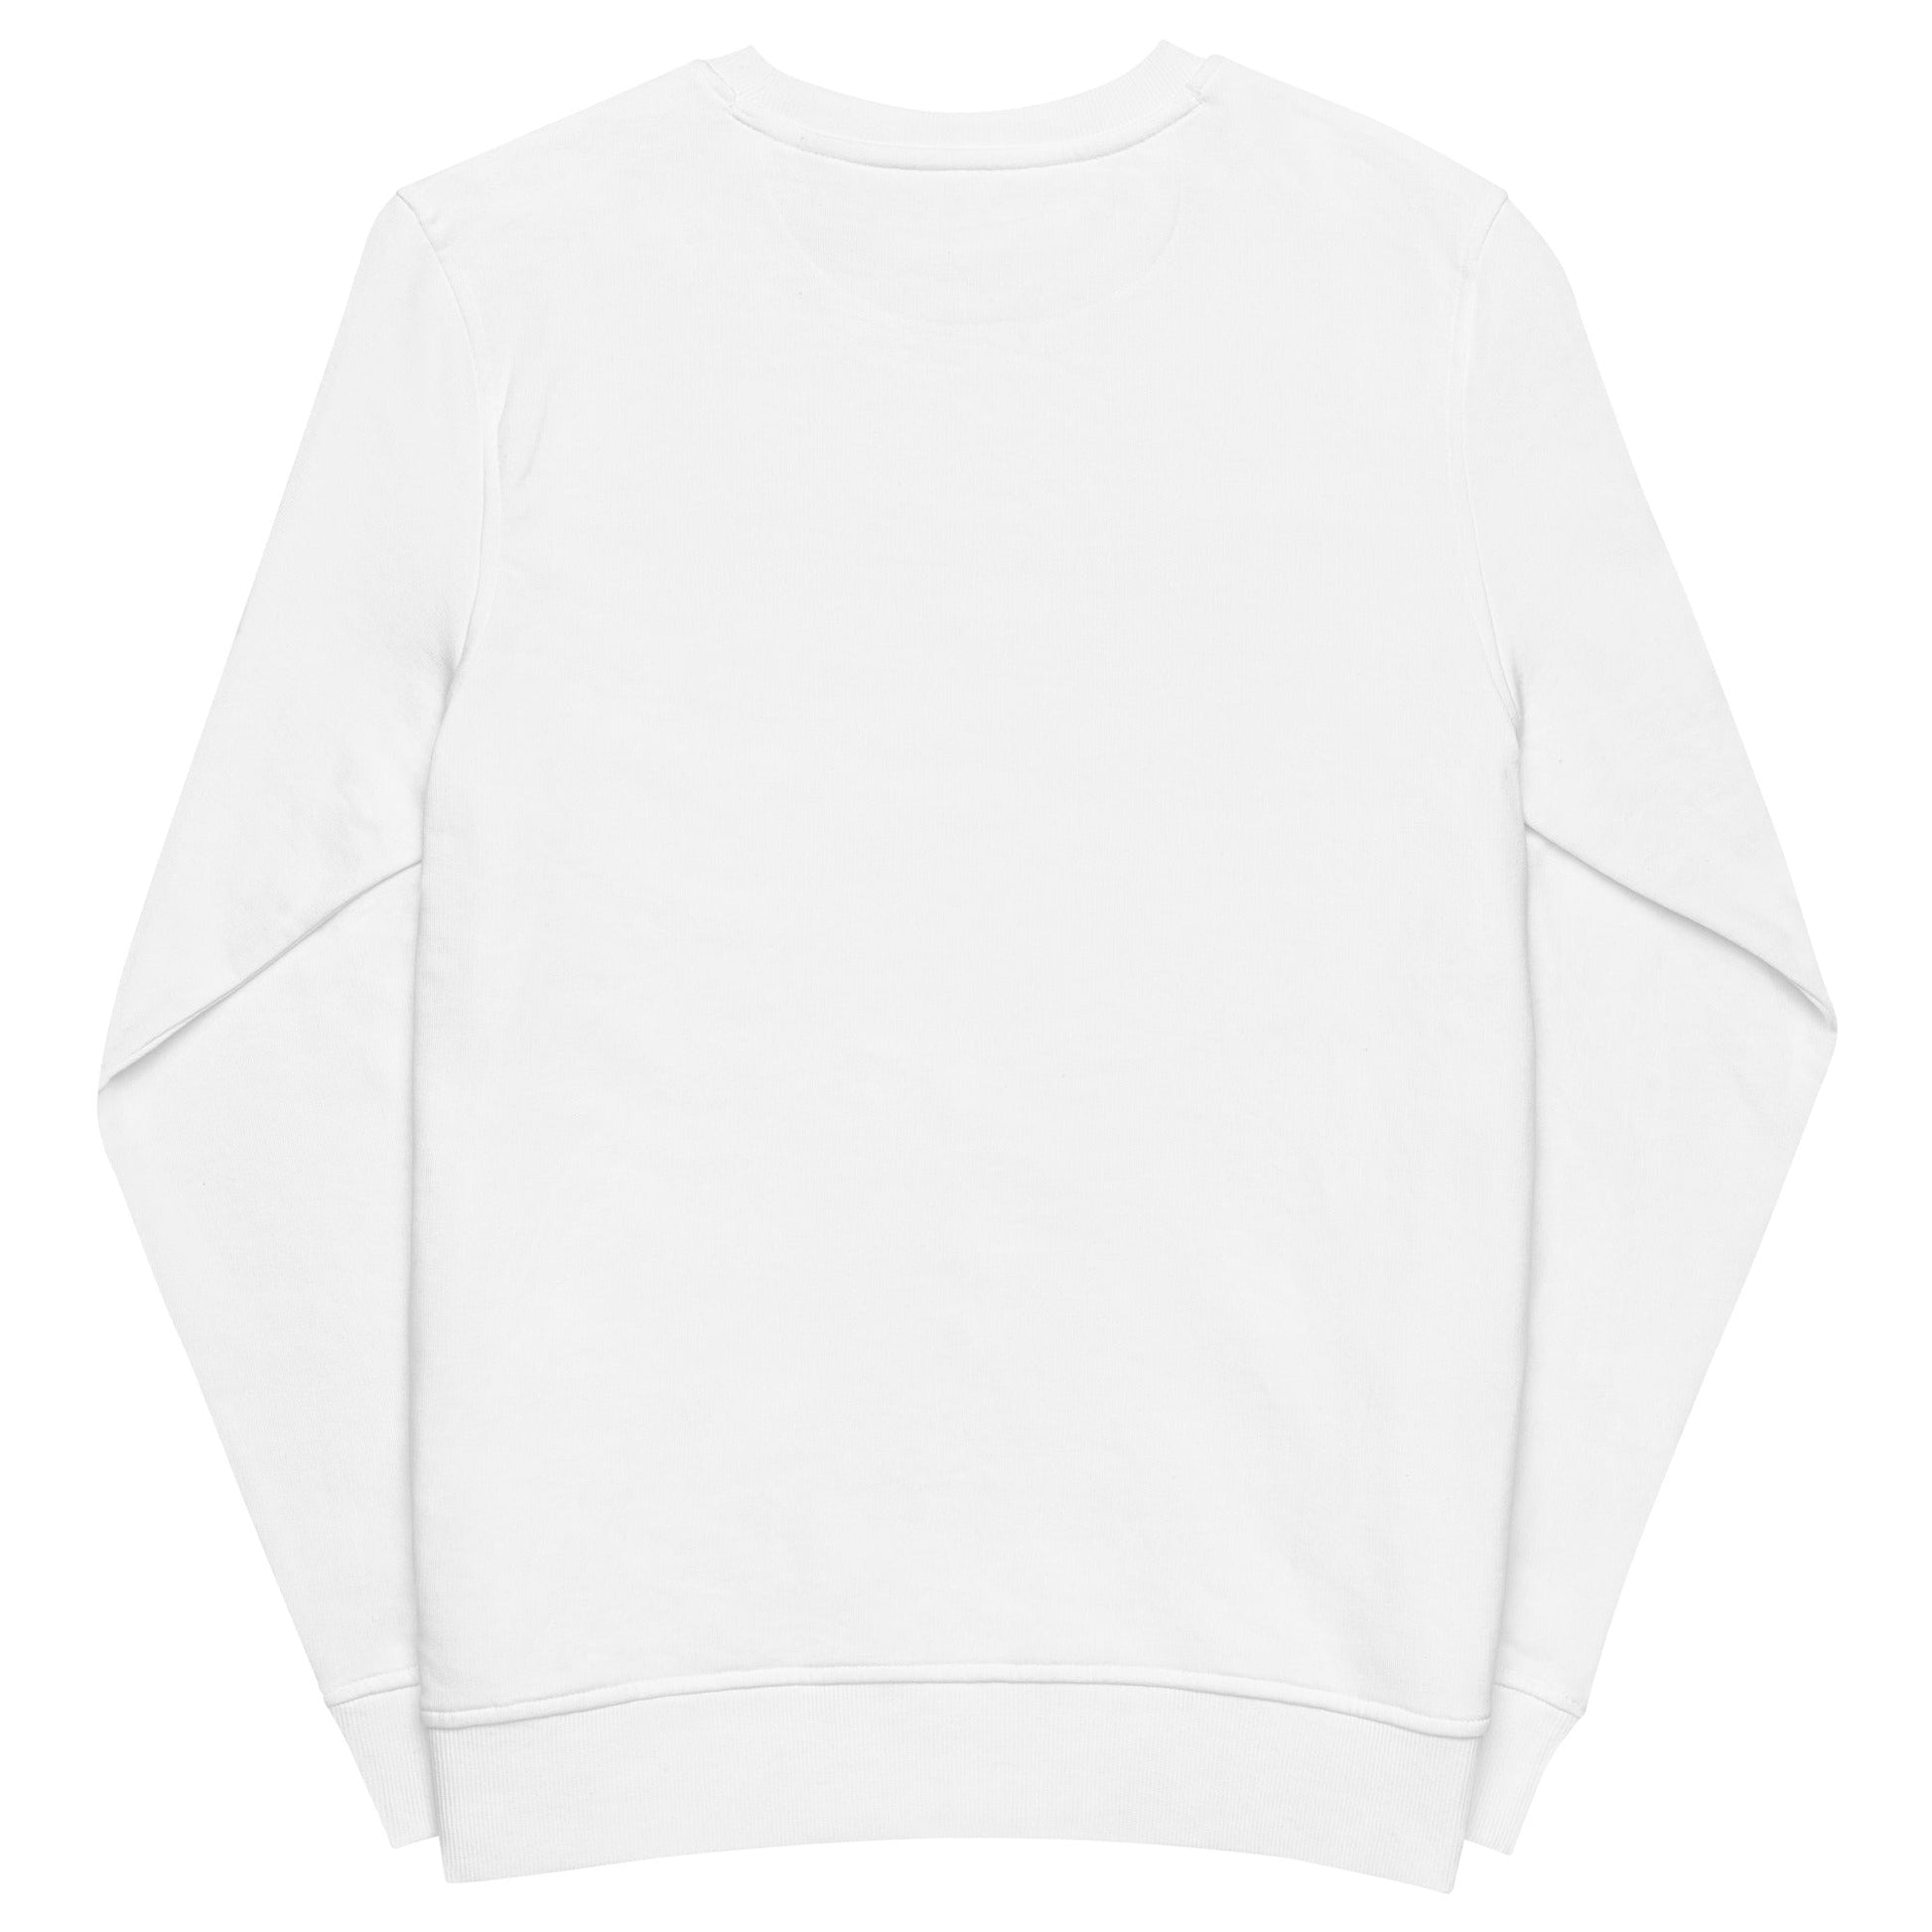 Strictly 4 the A.N.I.M.A.L.Z. Crewneck - For Health For Ethics - White